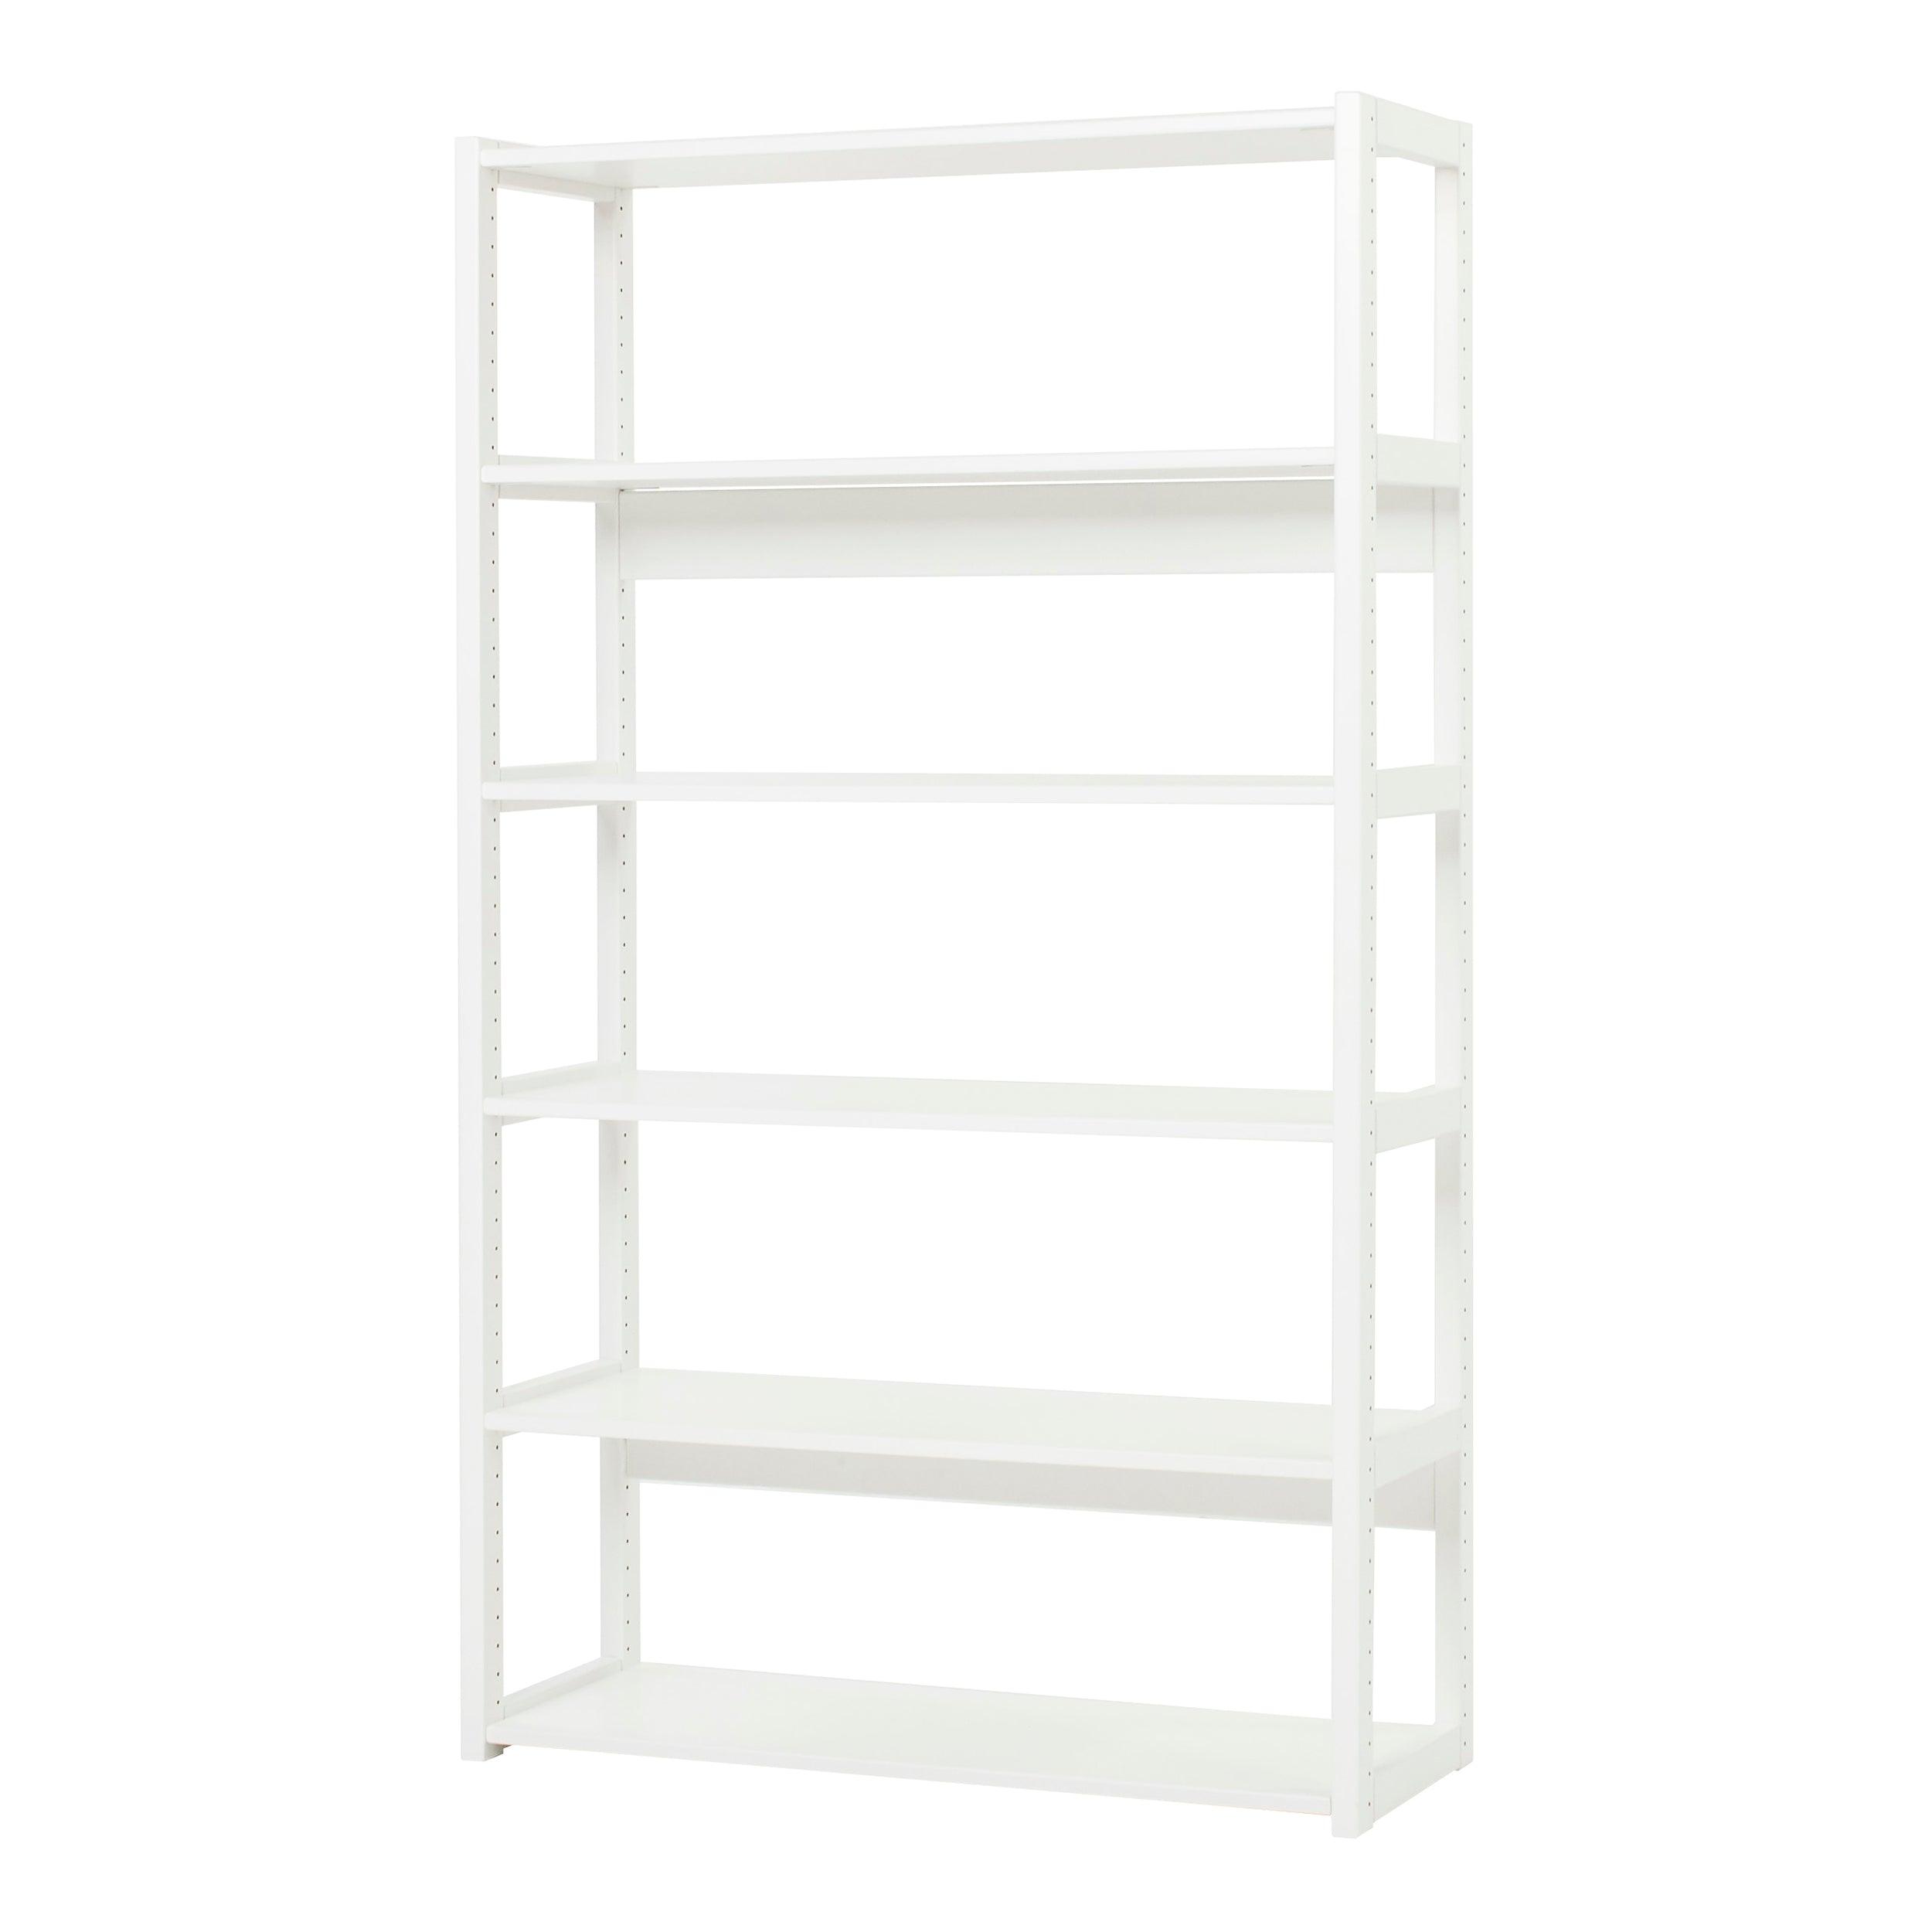 Hoppekids STOREY Set with 4 shelves and 2 support rods, White